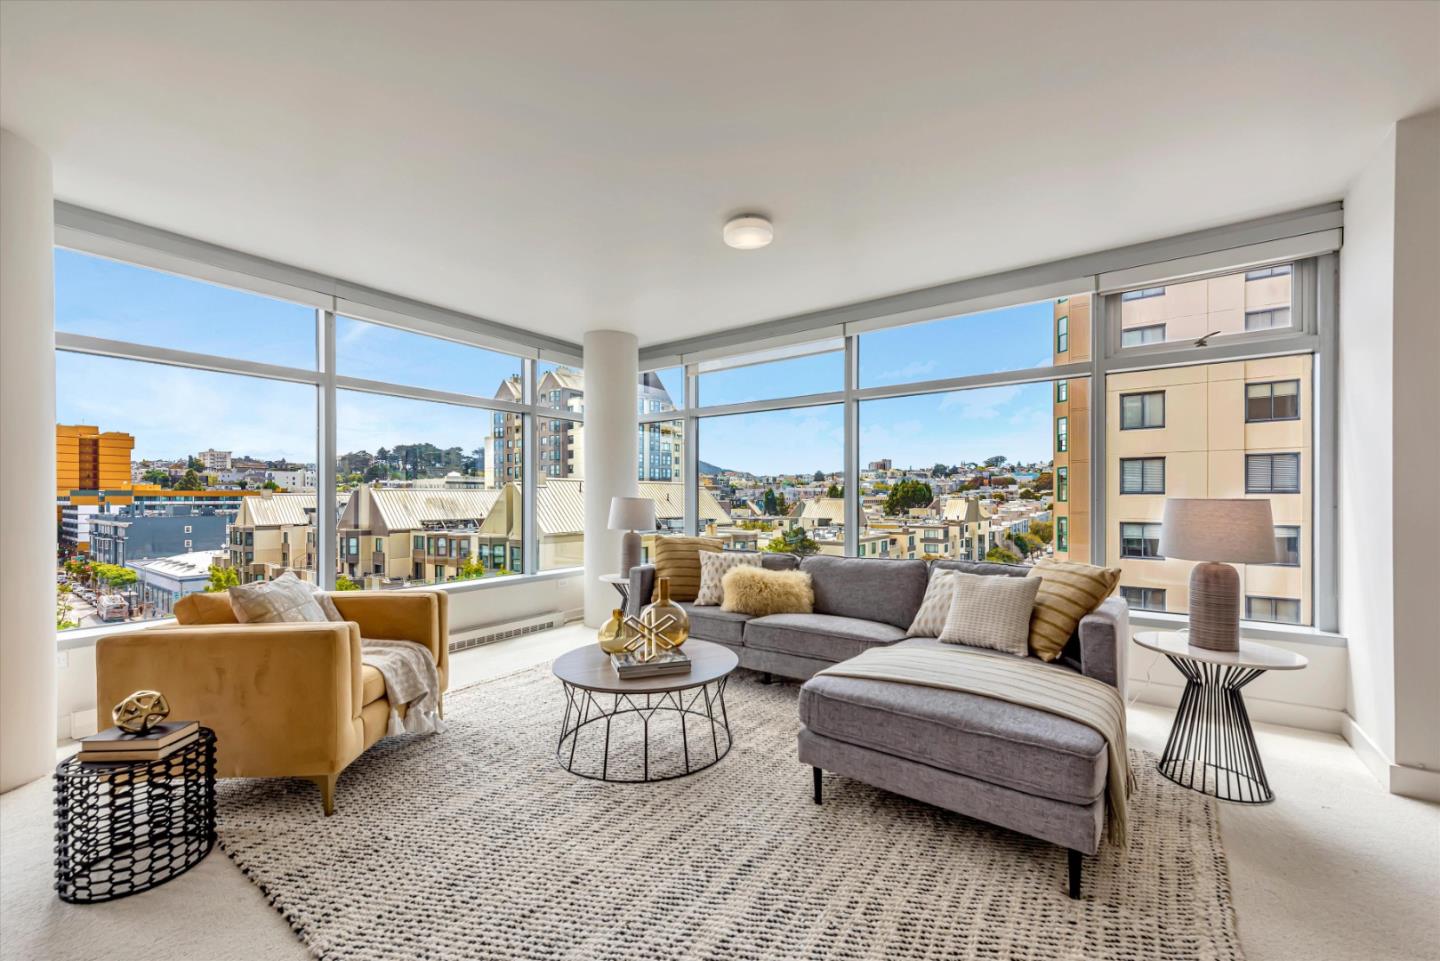 Photo of 1310 Fillmore St #603 in San Francisco, CA